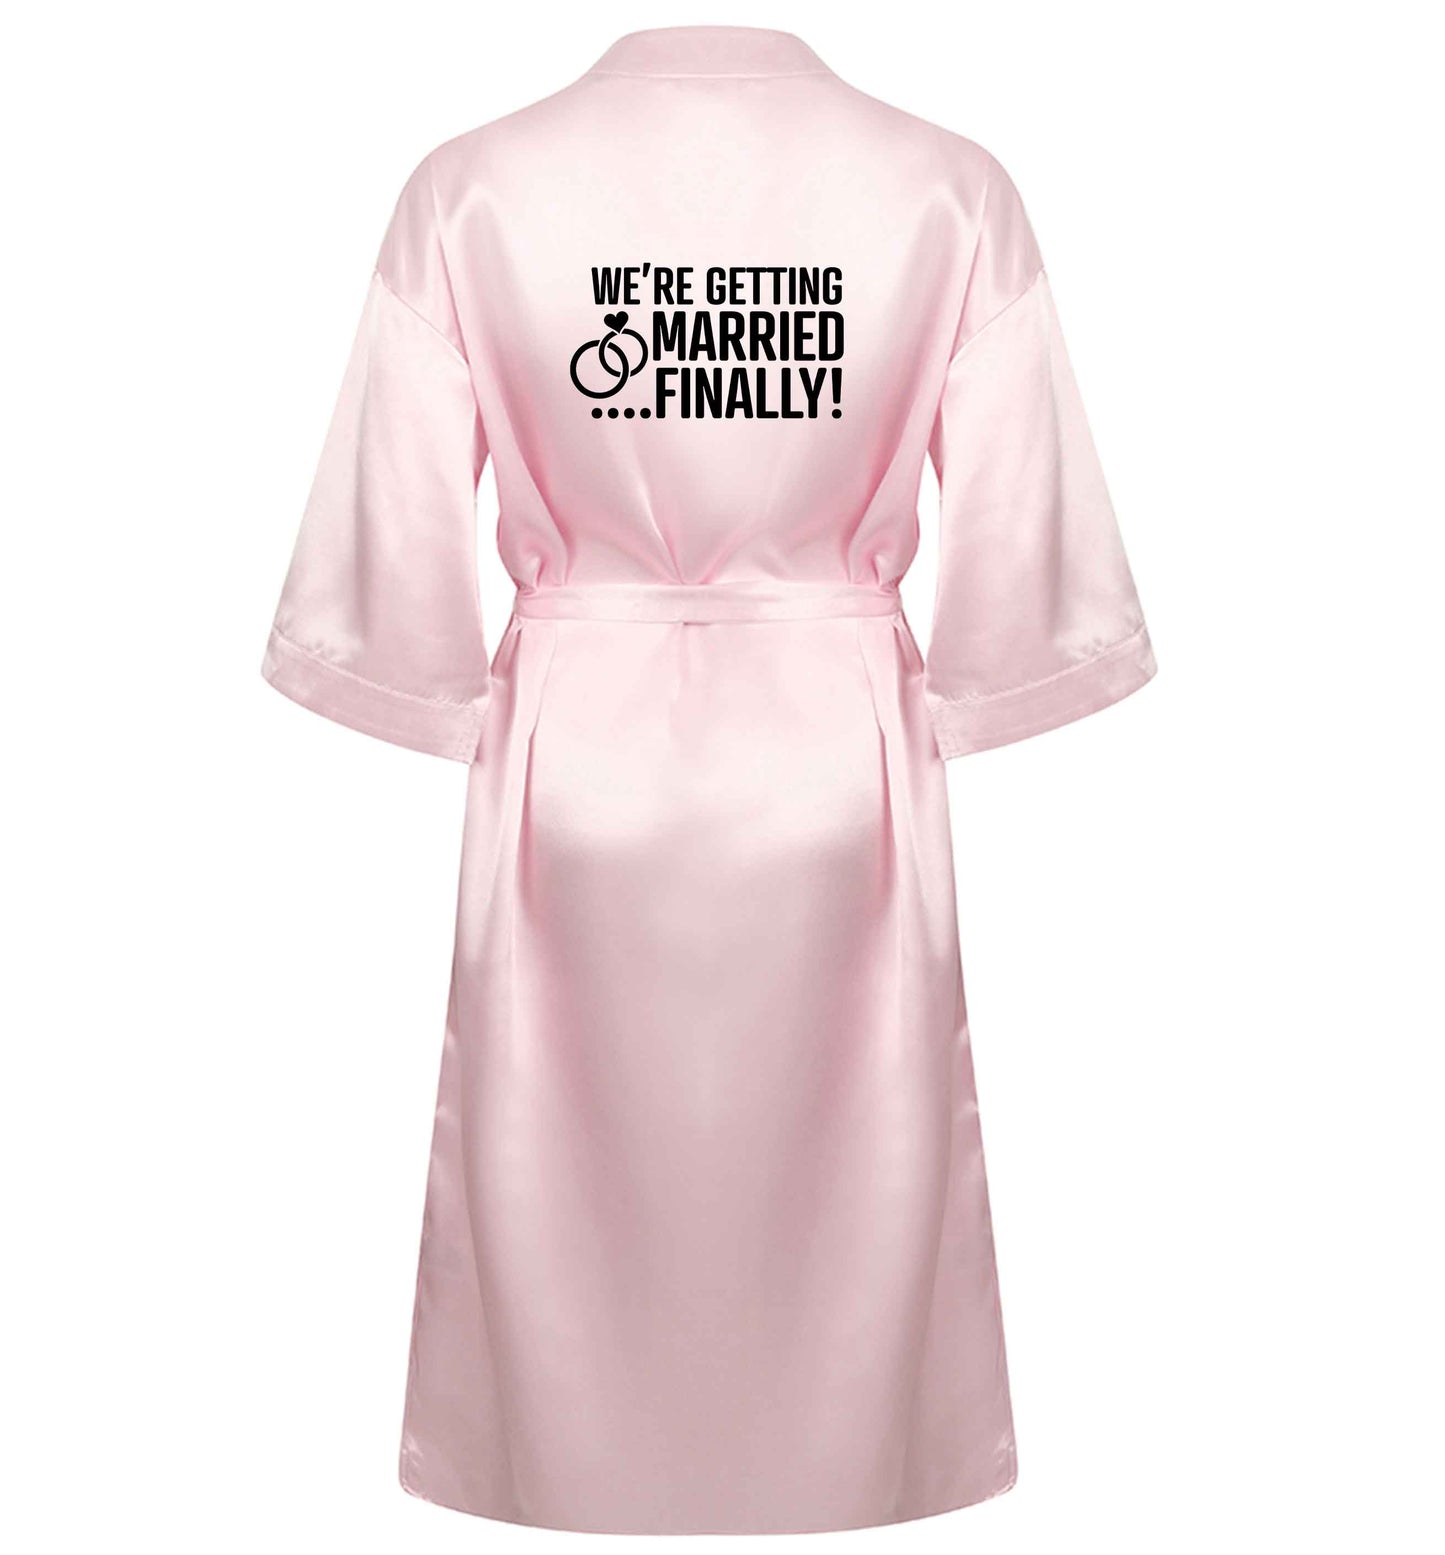 It's been a long wait but it's finally happening! Let everyone know you're celebrating your big day soon! XL/XXL pink  ladies dressing gown size 16/18